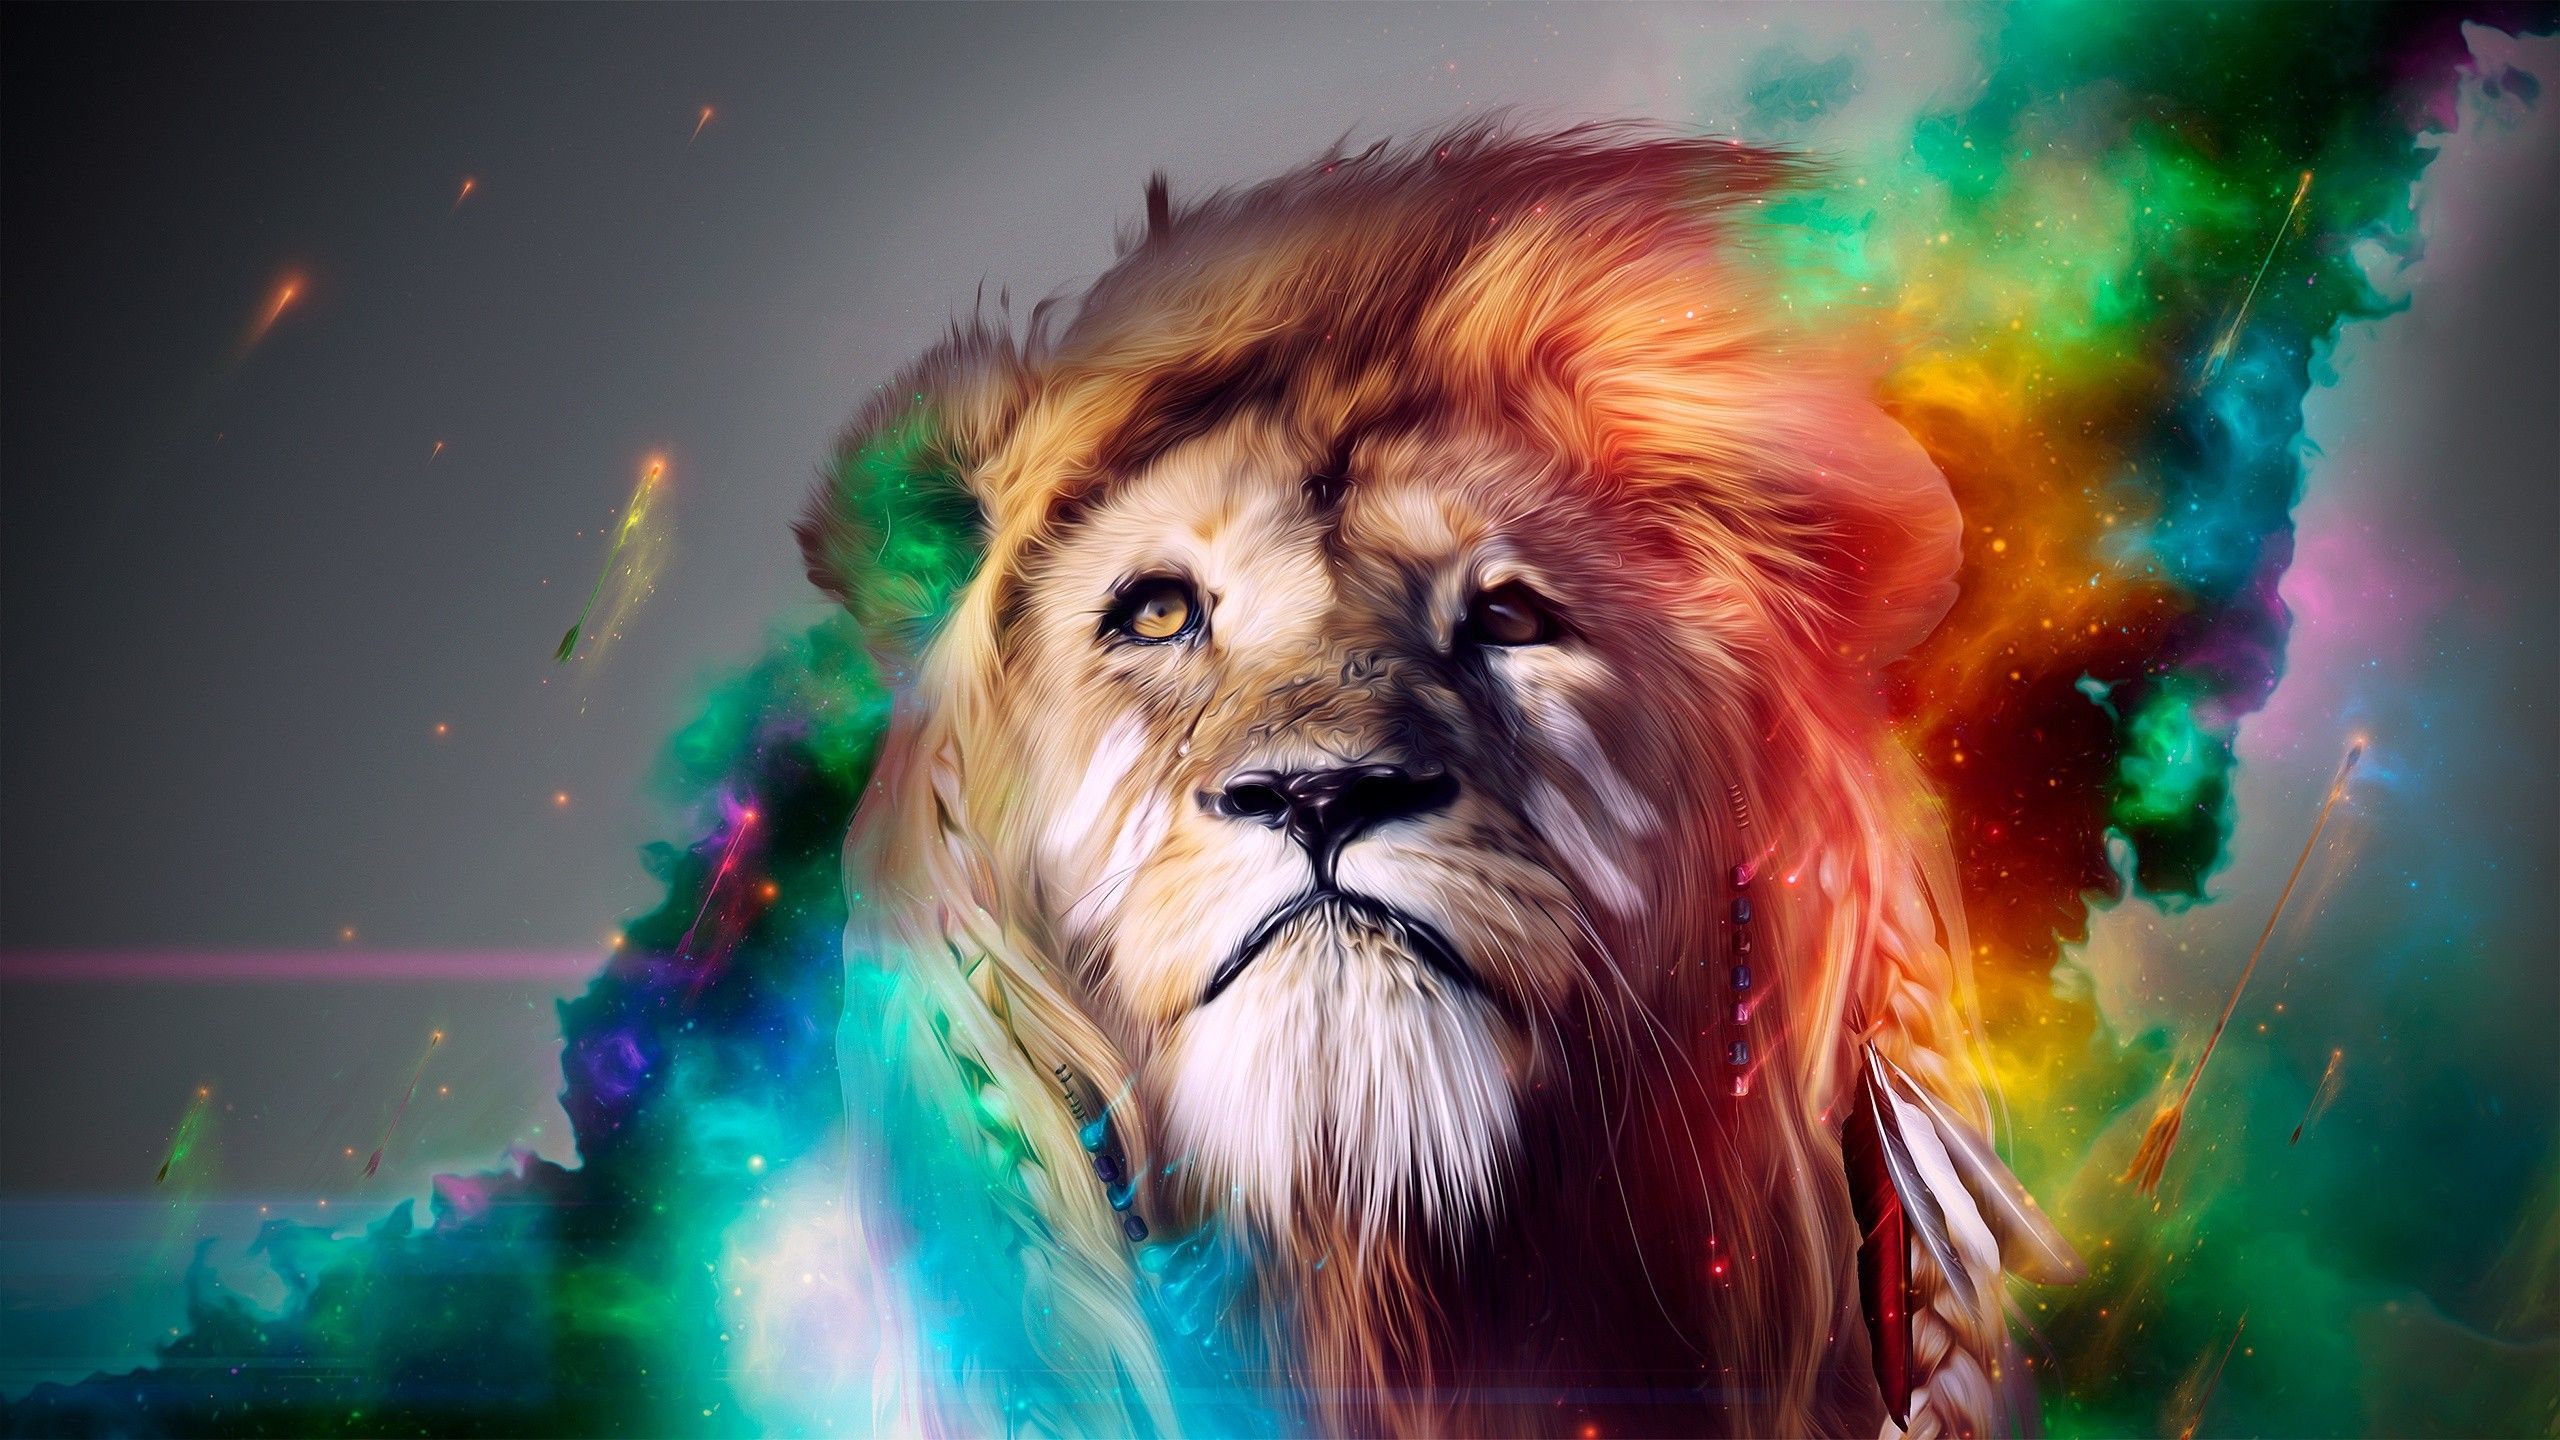 813 Lion HD Wallpapers Backgrounds - Wallpaper Abyss